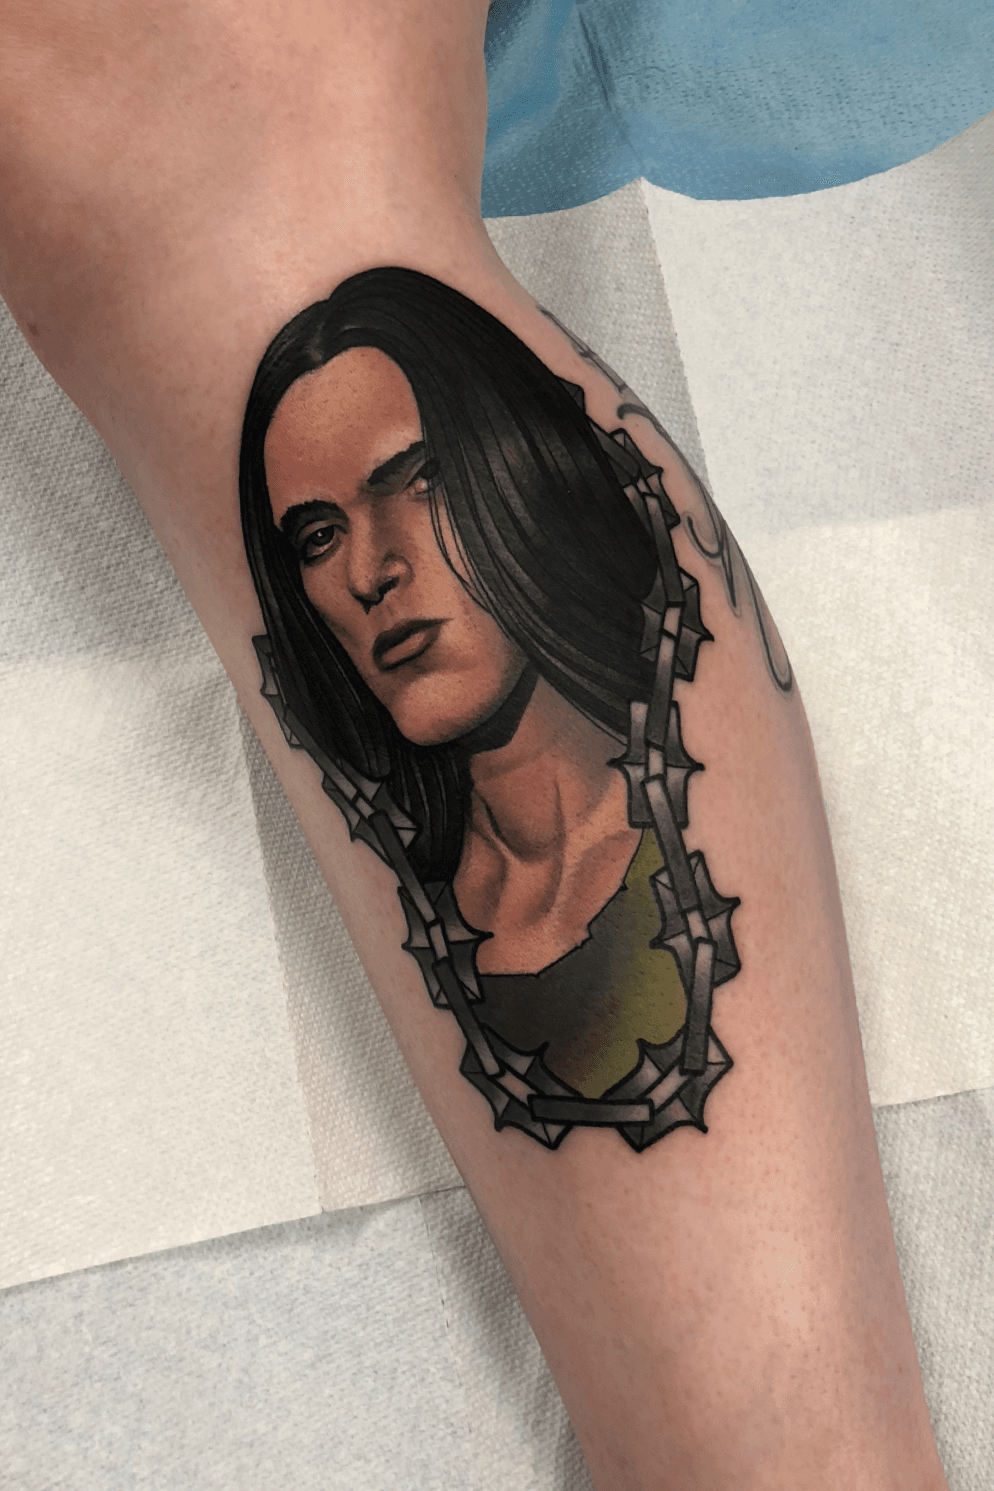 Typeonegative tattoo with some creative twists bandlogo bandtattoo  typeonegative wolfeye wolftattoo h  Picture tattoos Negative tattoo  Tattoo equipment